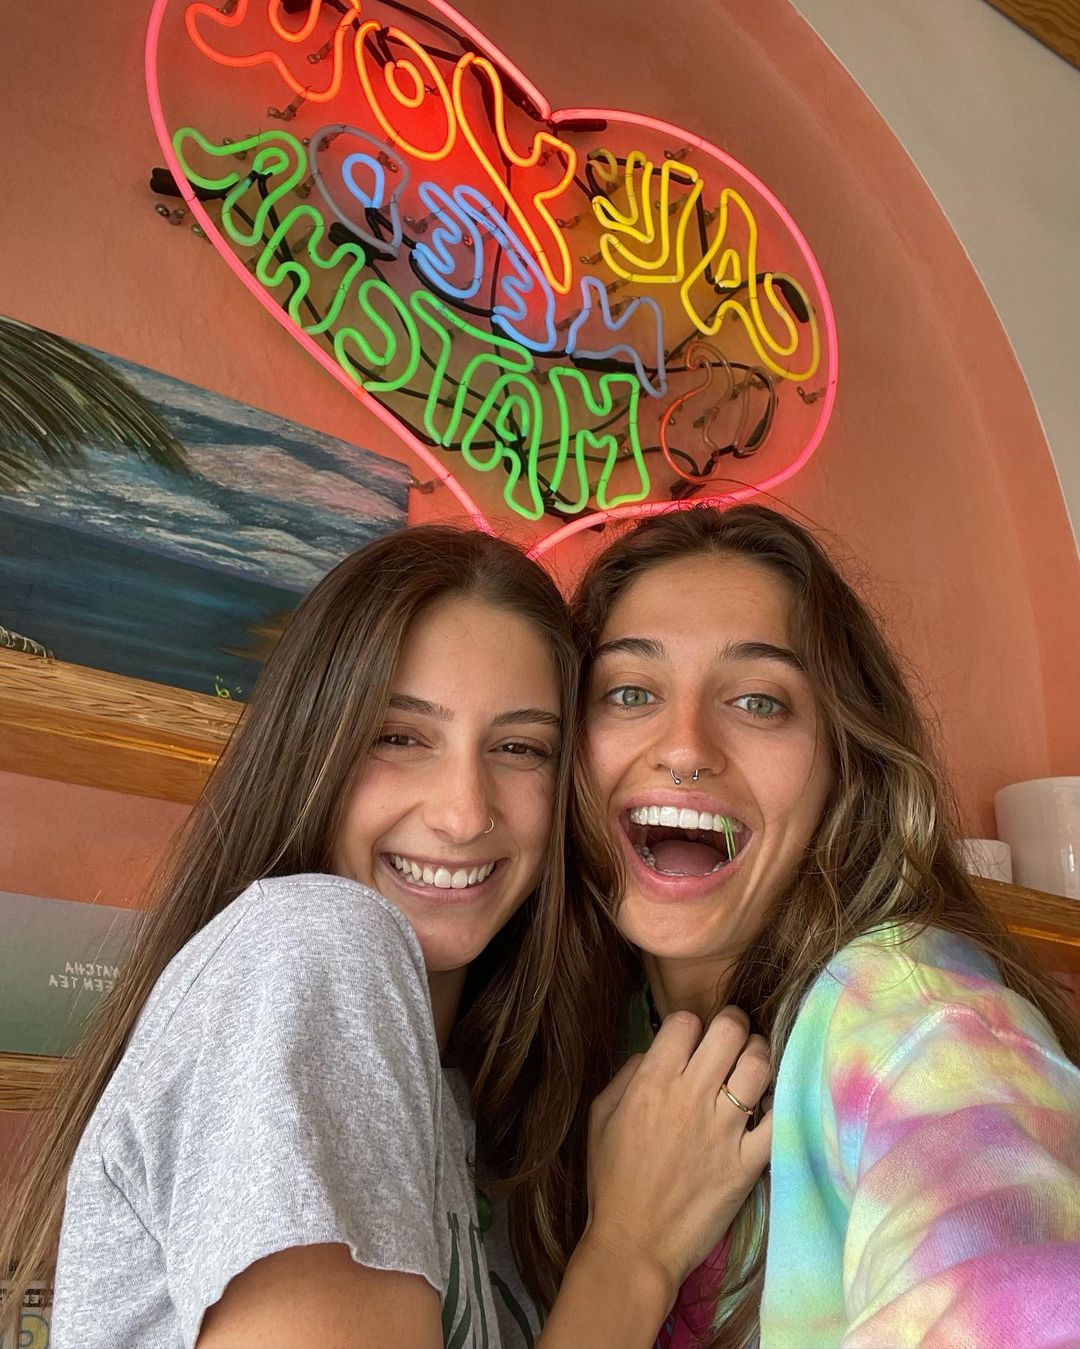 Why Did Avery Cyrus, Soph Mosca Split? Breakup Statements